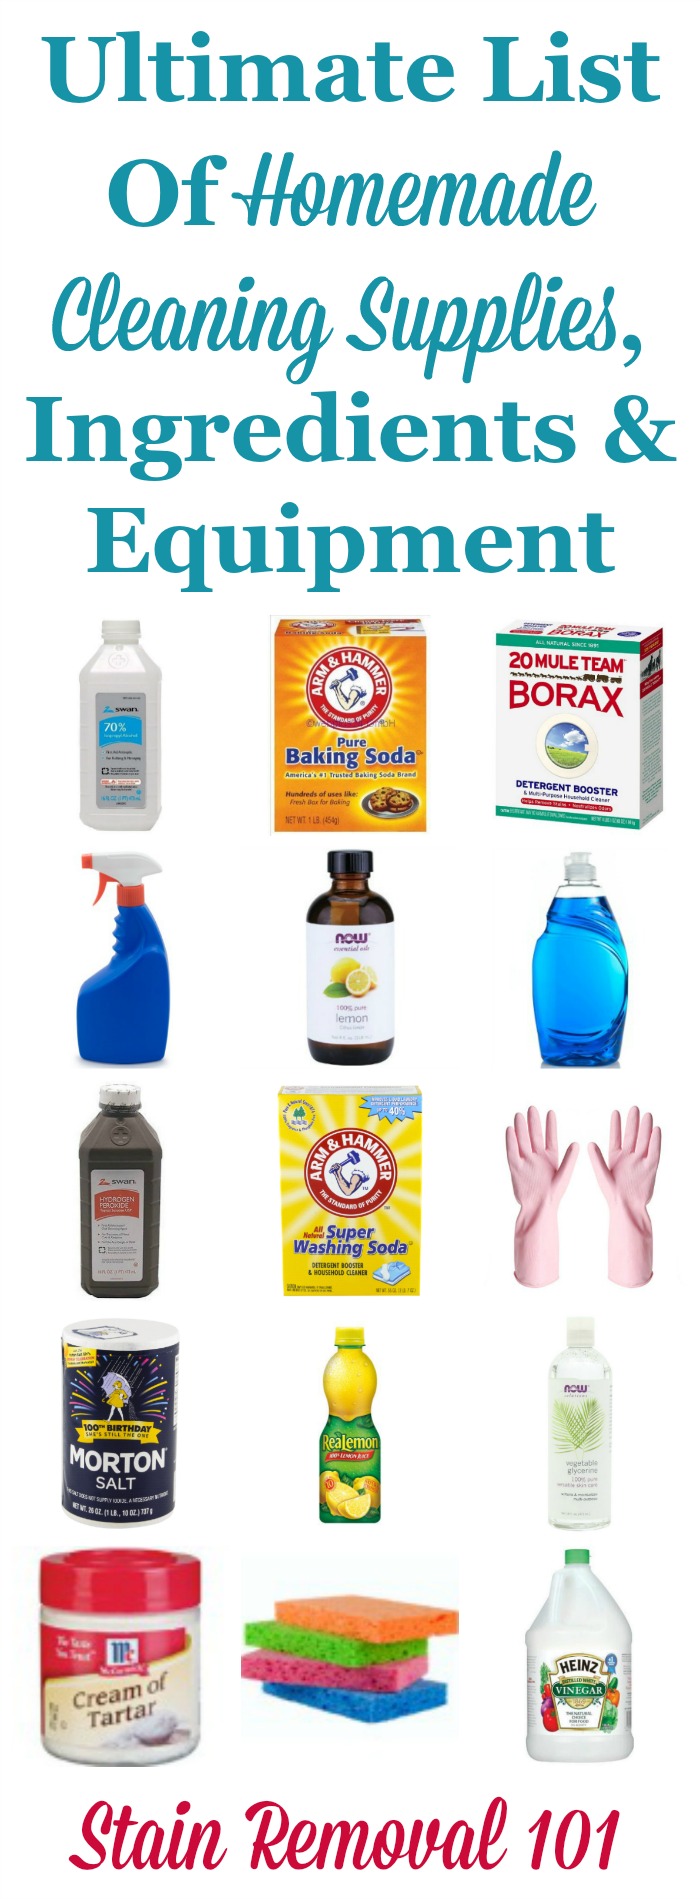 The ultimate list of homemade cleaning supplies, ingredients and equipment needed to make all of your own cleaning products, plus information on how to use them {on Stain Removal 101}